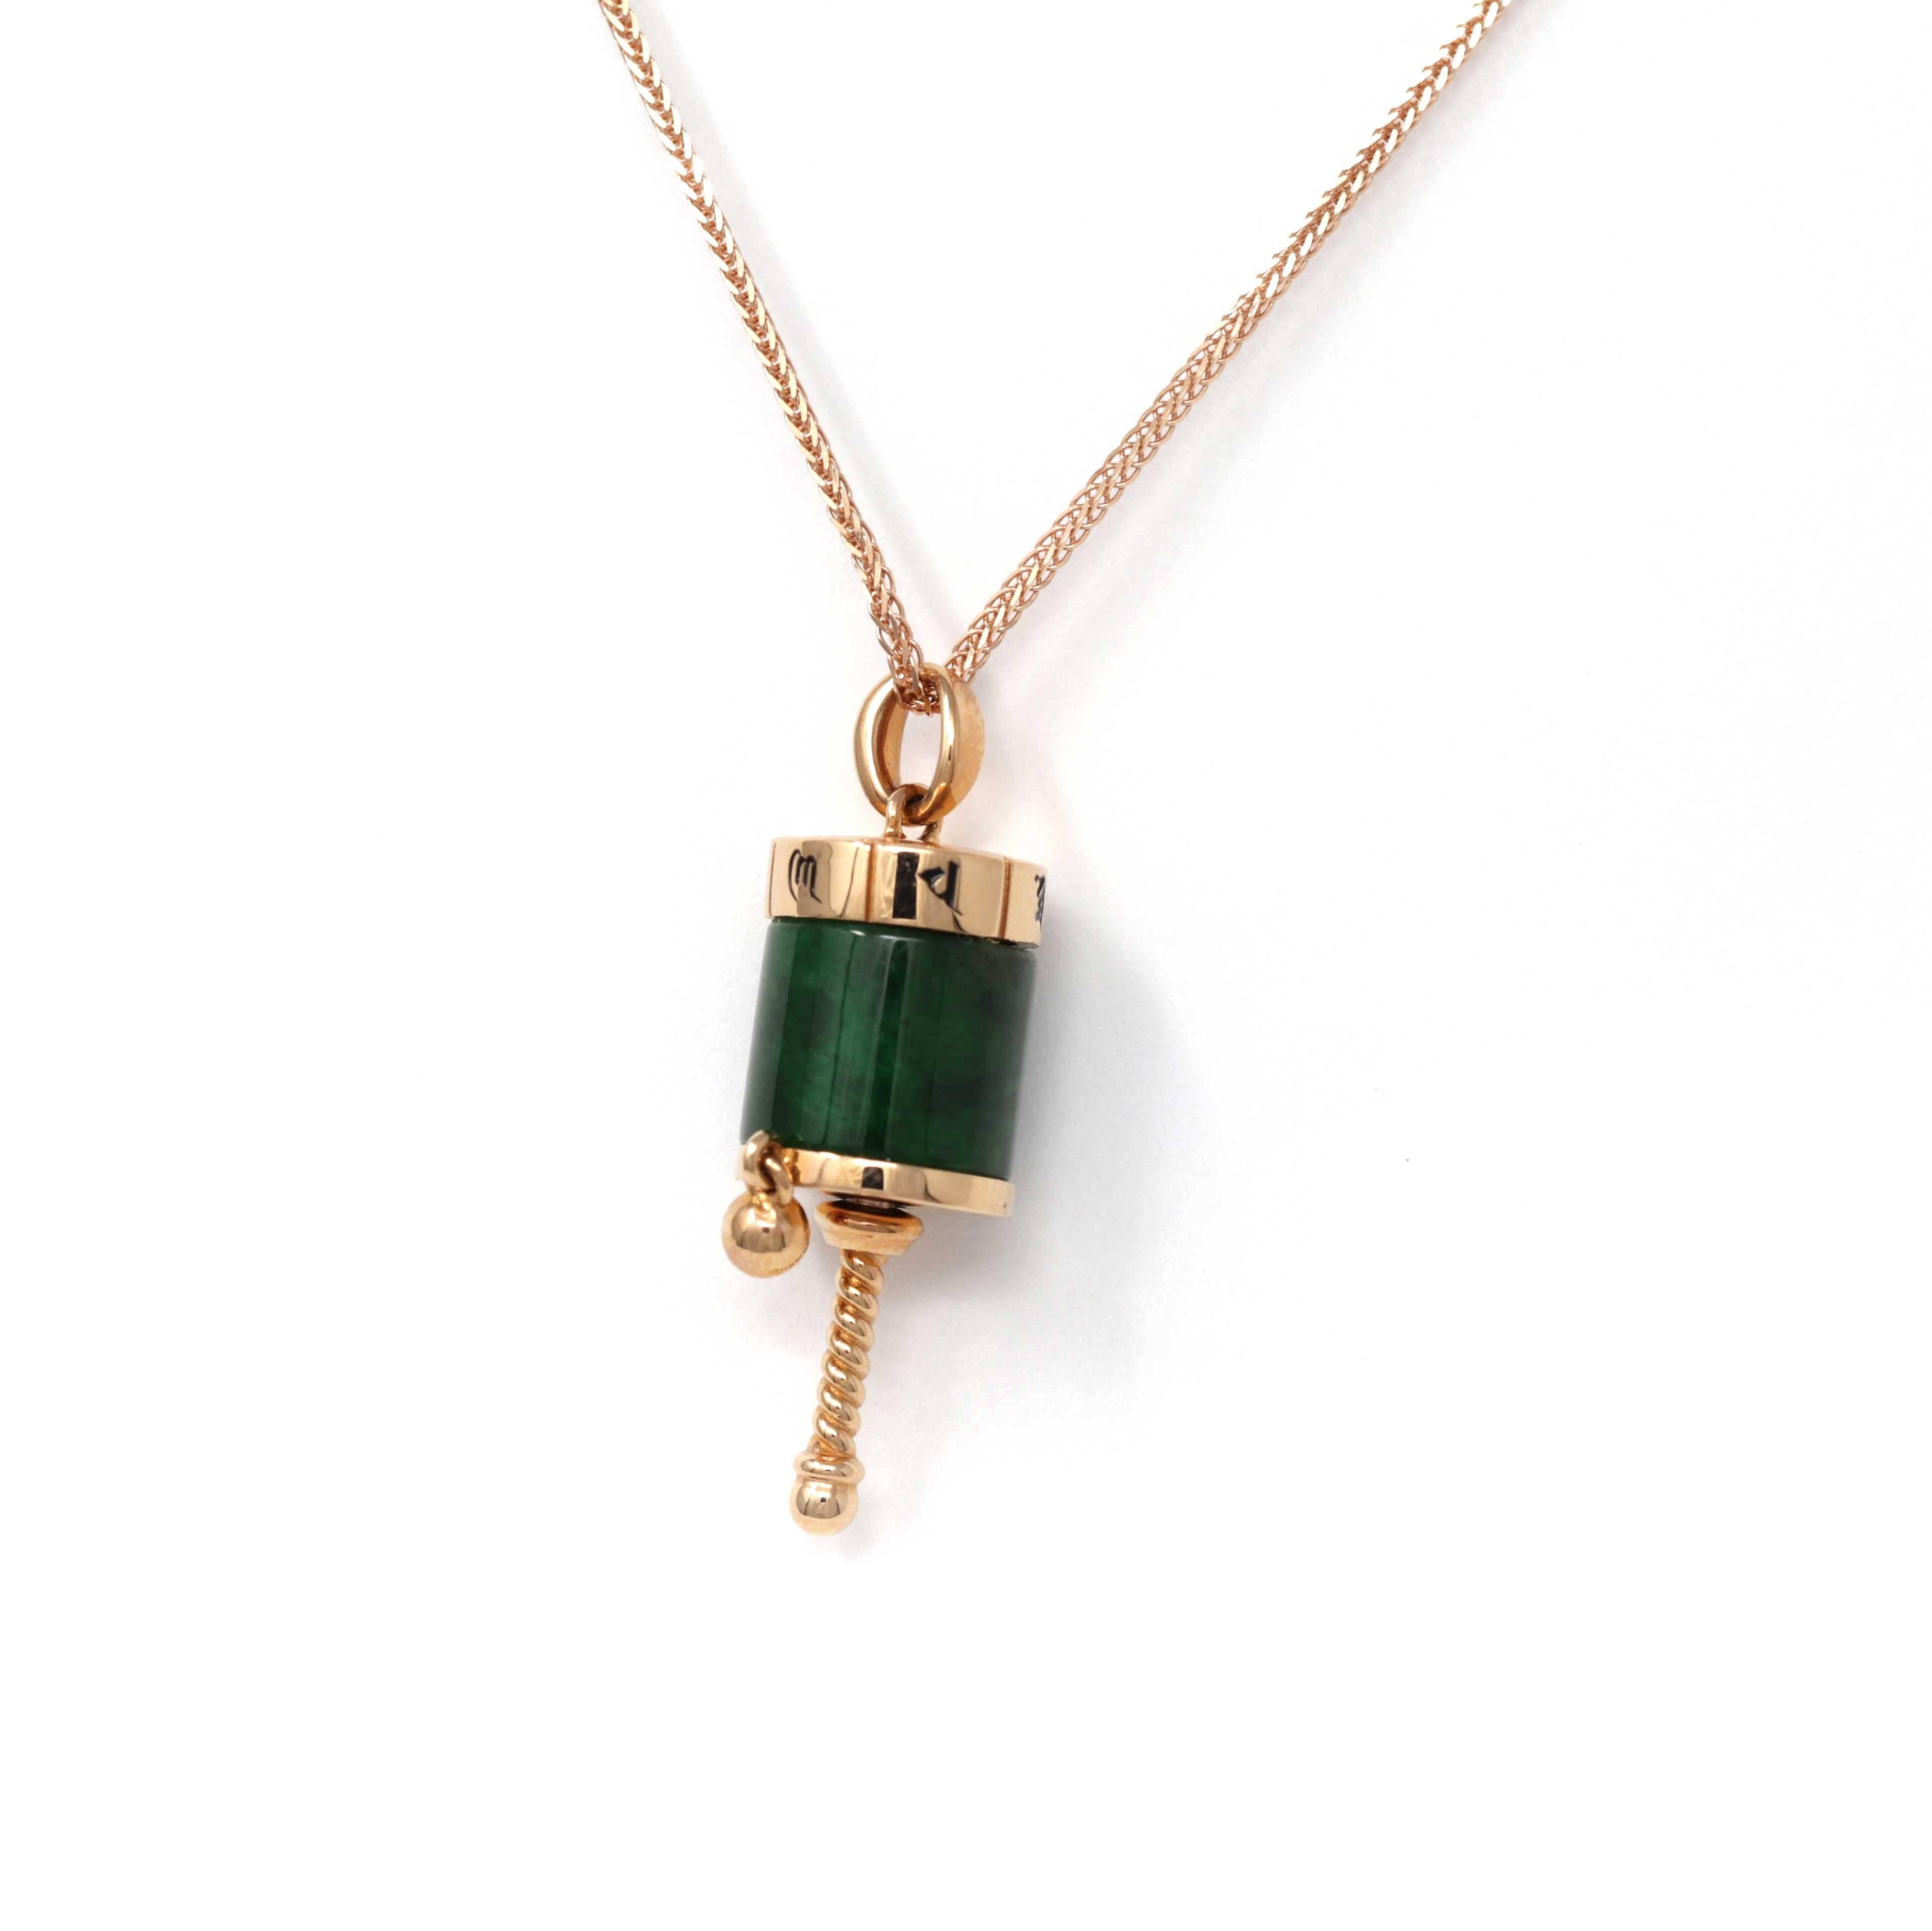 jade pendant meaning